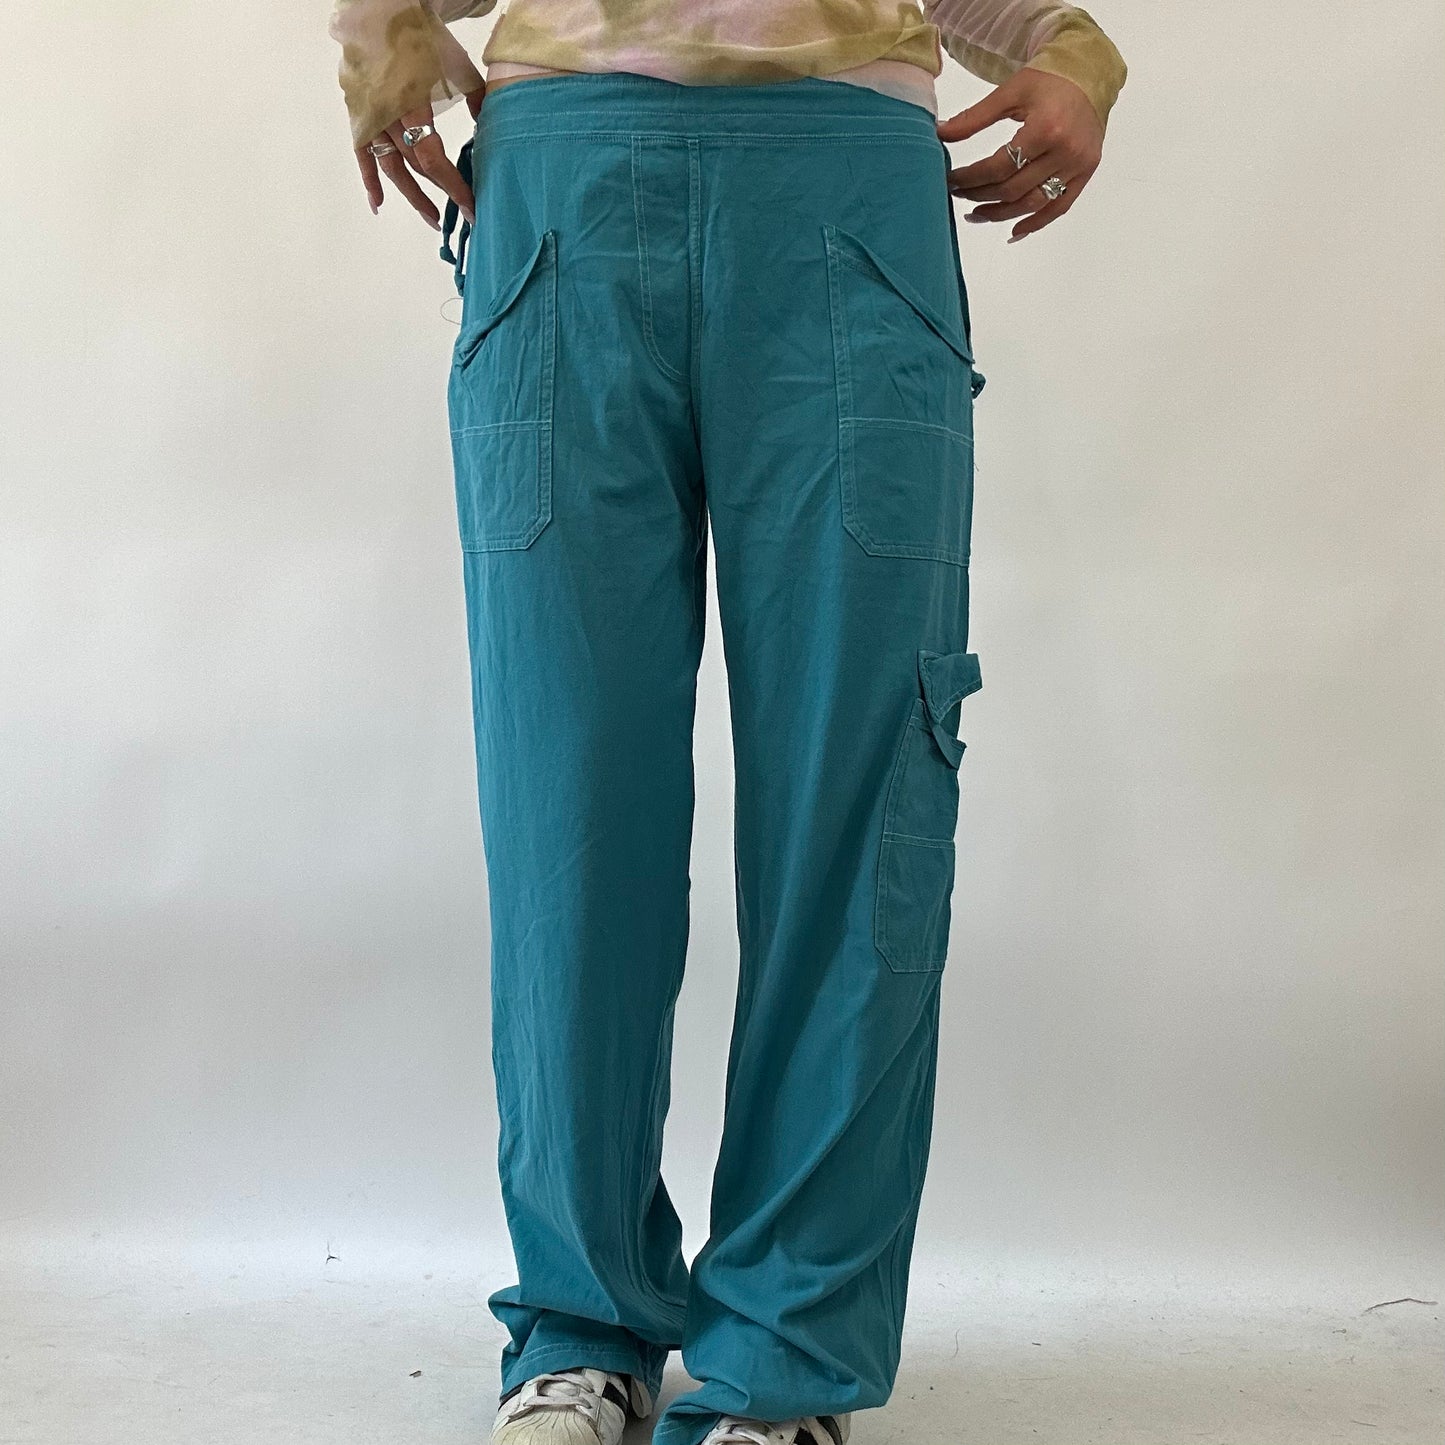 BOHO GIRL DROP | medium blue cargo trousers with pocket details and contrast stitch